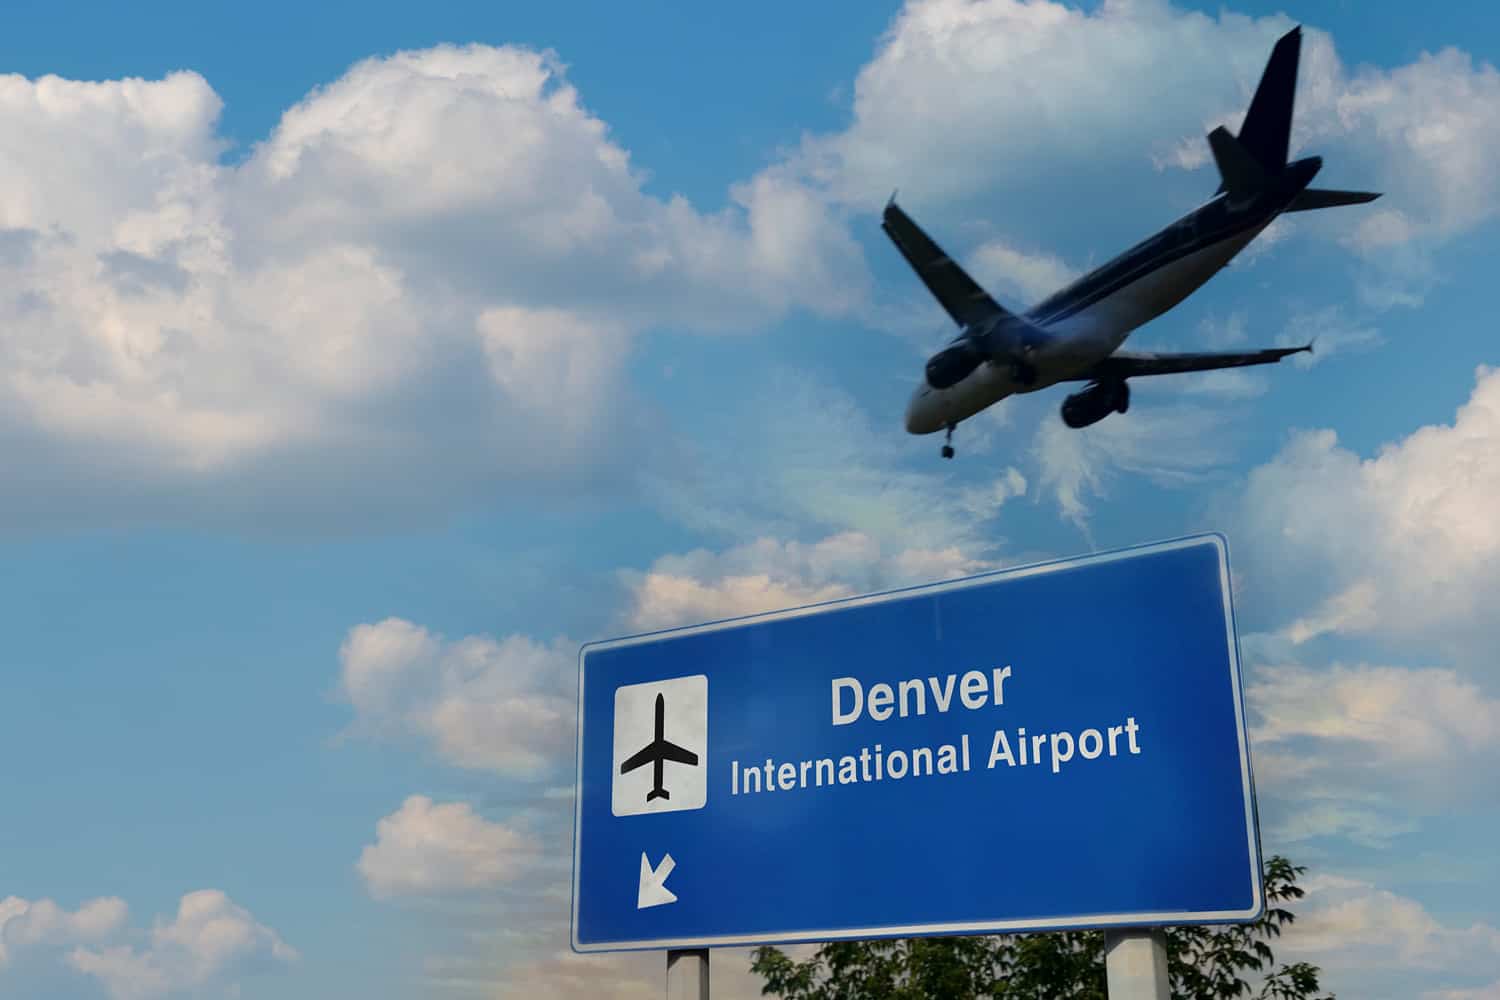 road sign that says Denver International Airport with plane flying overhead